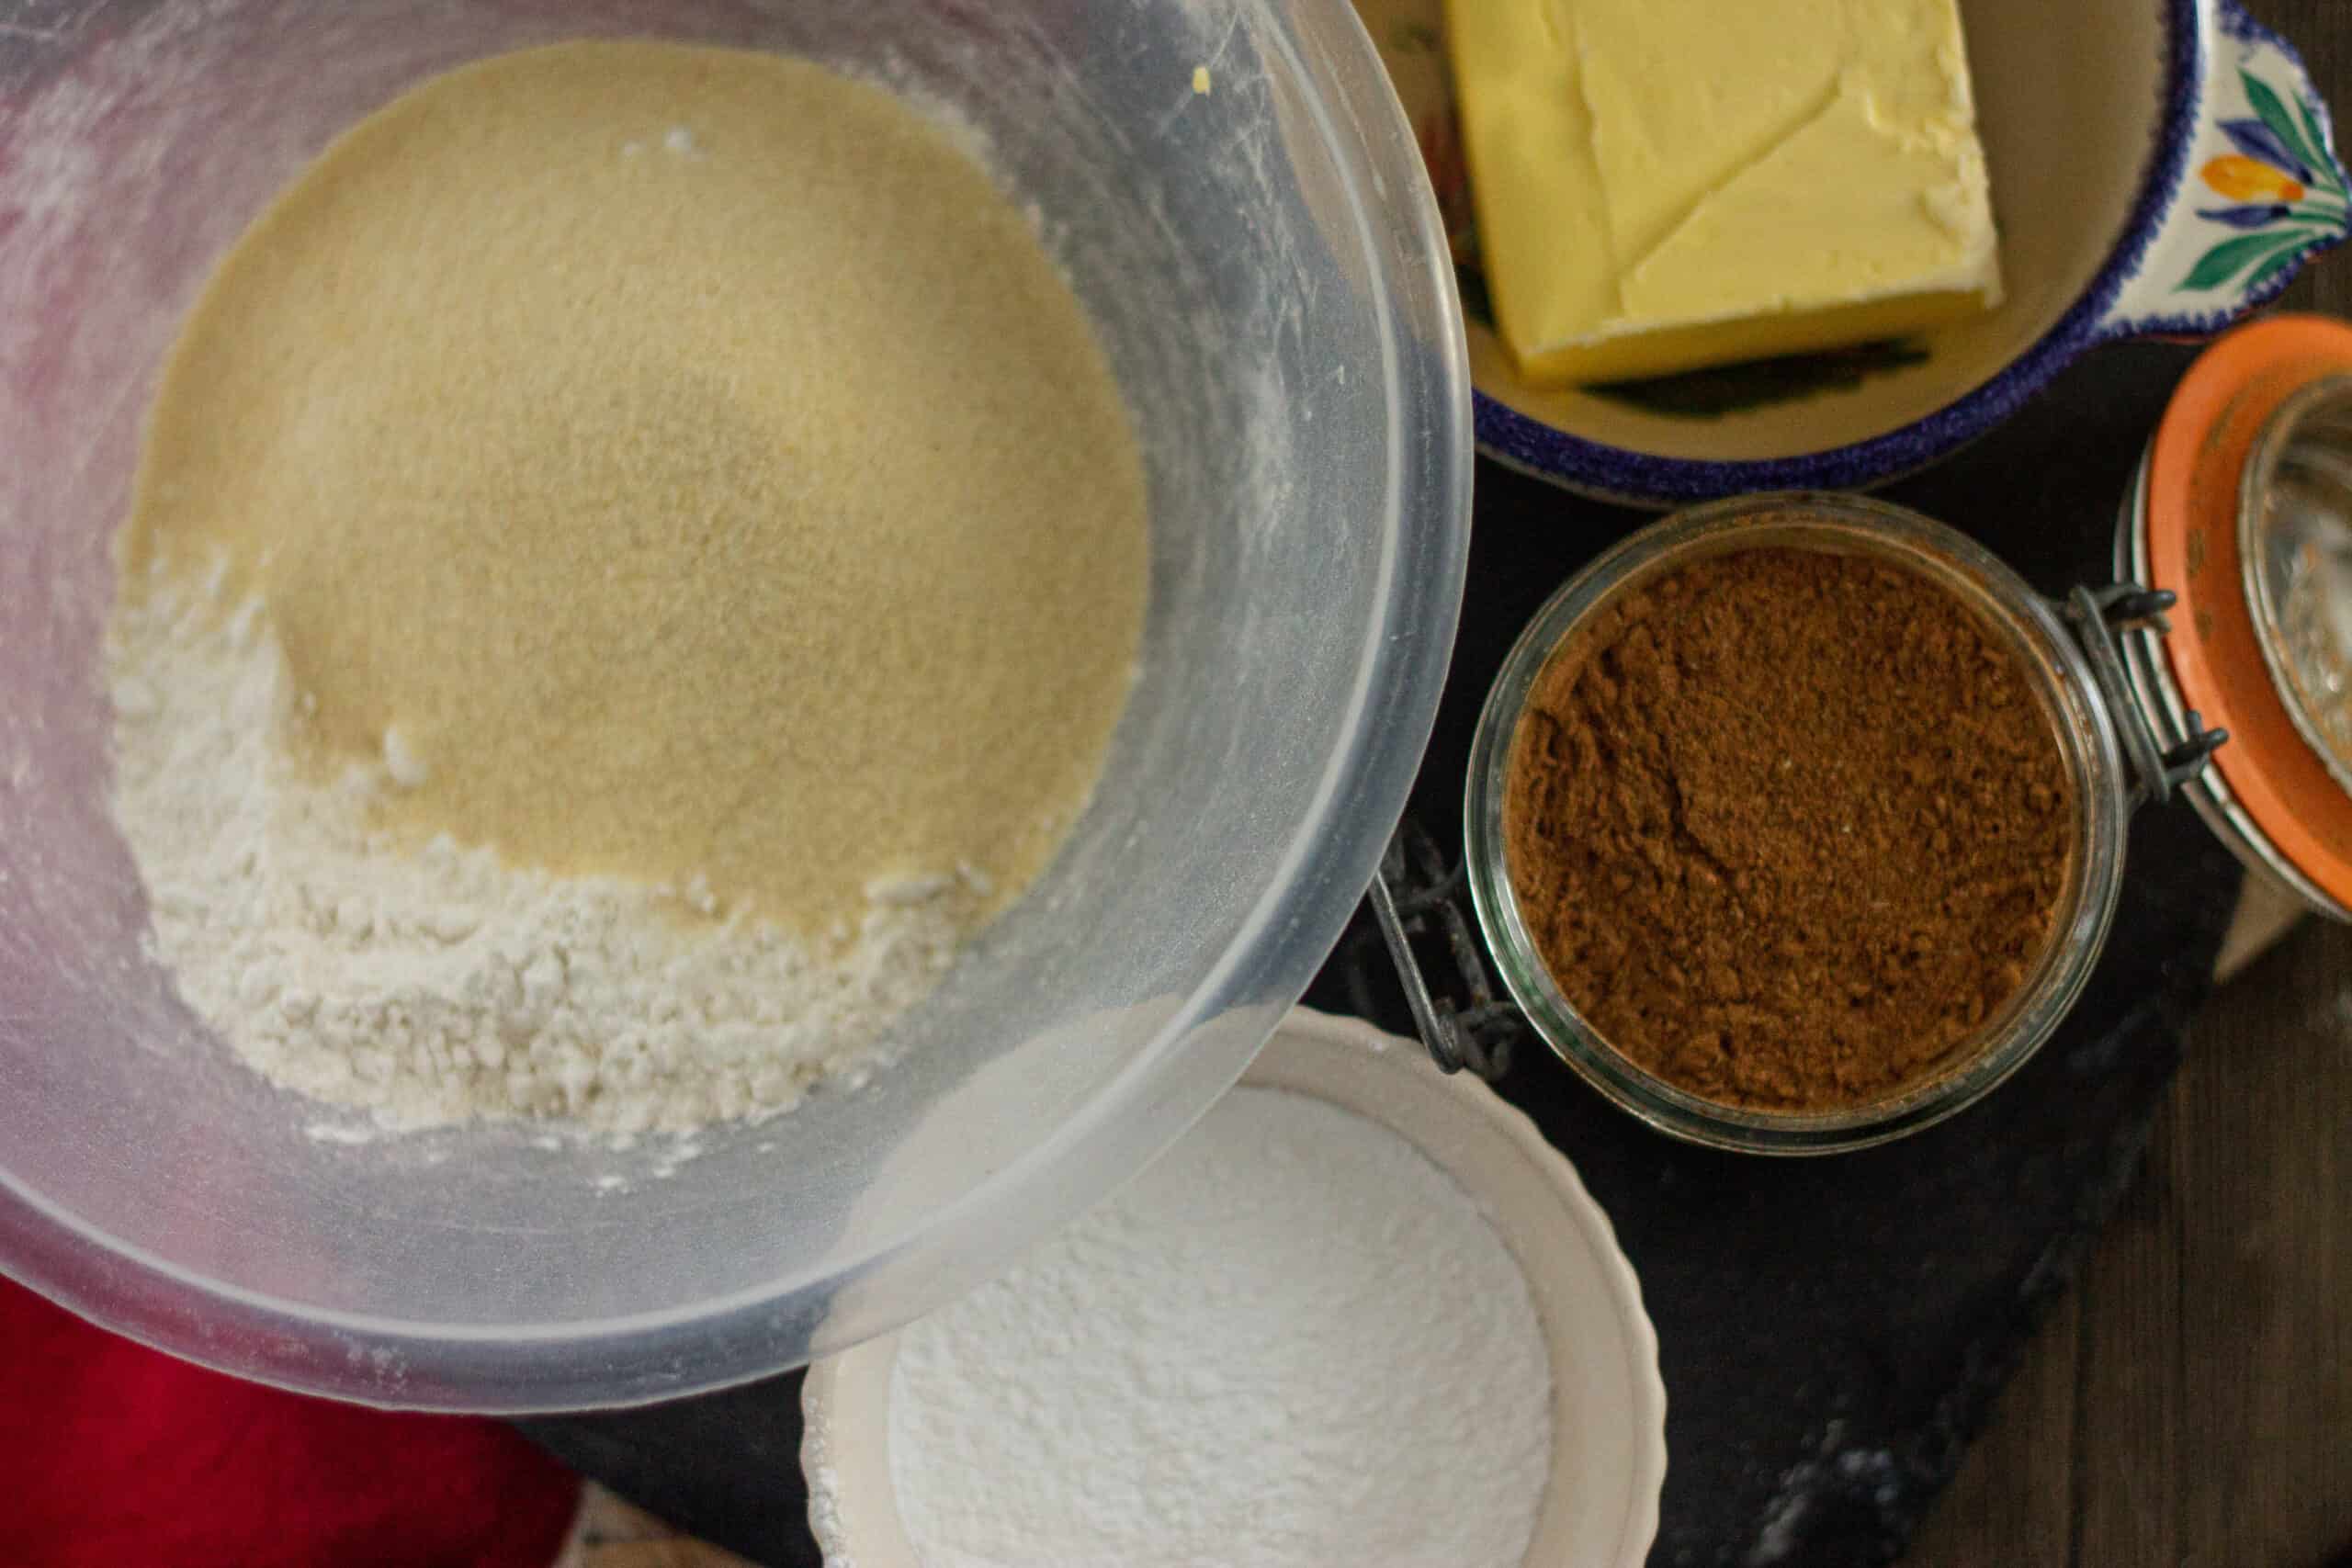 Ingredients for making chai shortbread cookies